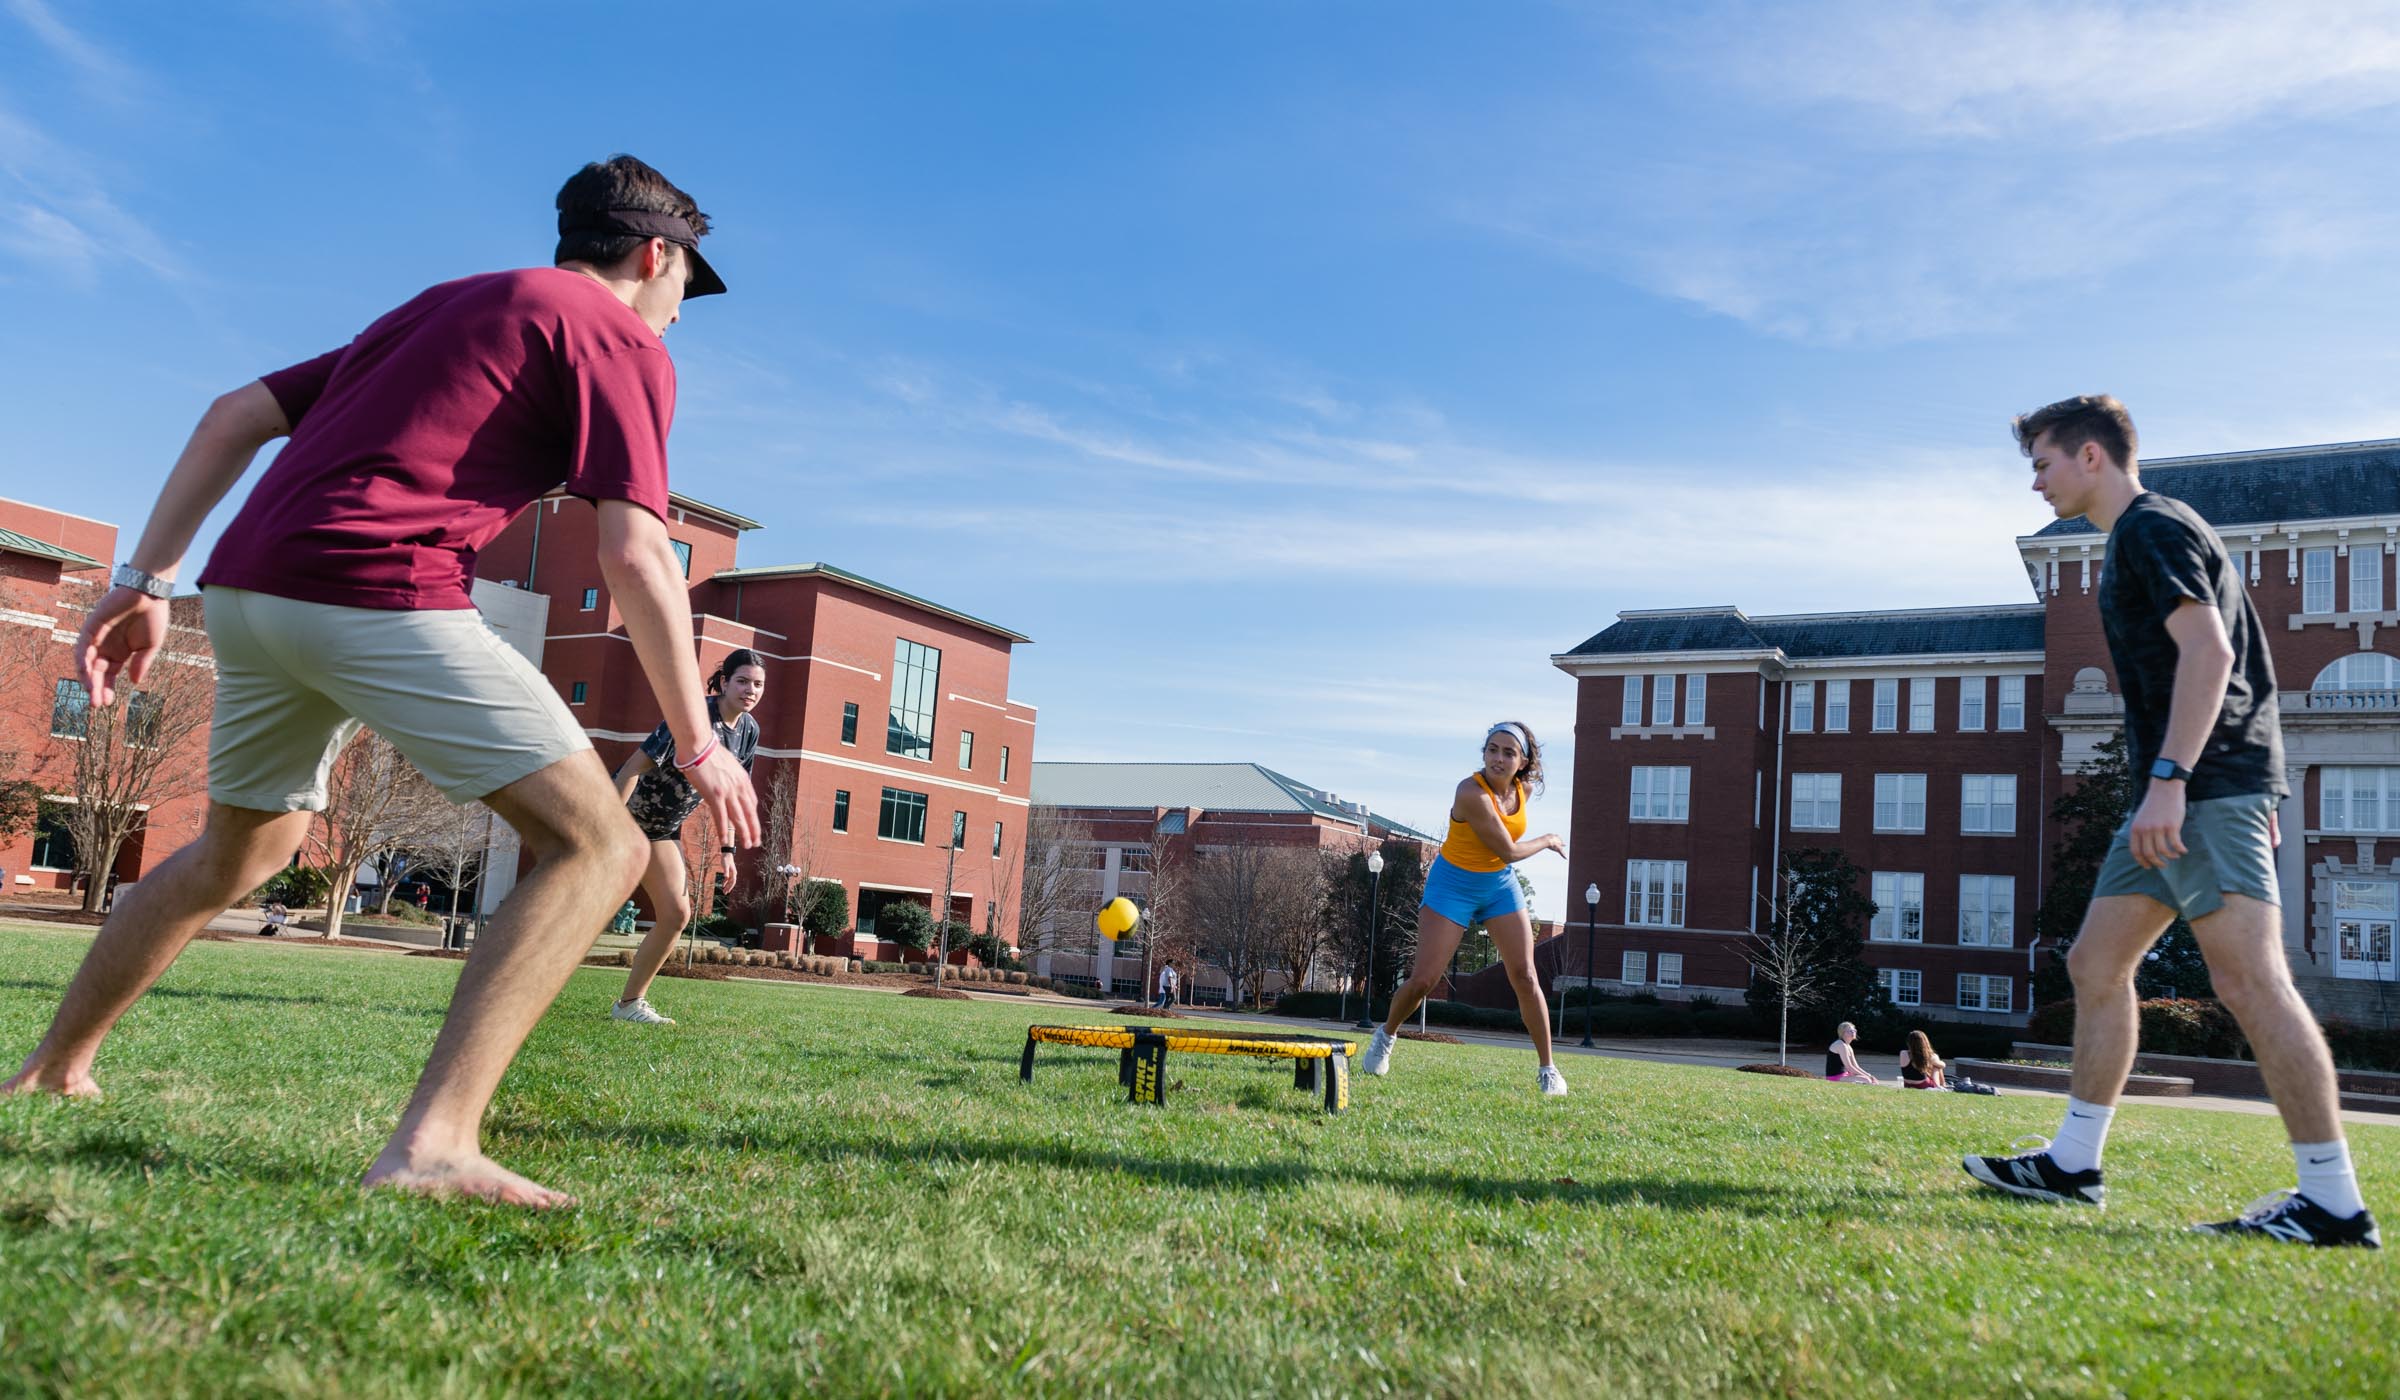 Four students are captured mid game while playing Spike Ball on the green grass near Mitchell Memorial Library and Swalm Hall.